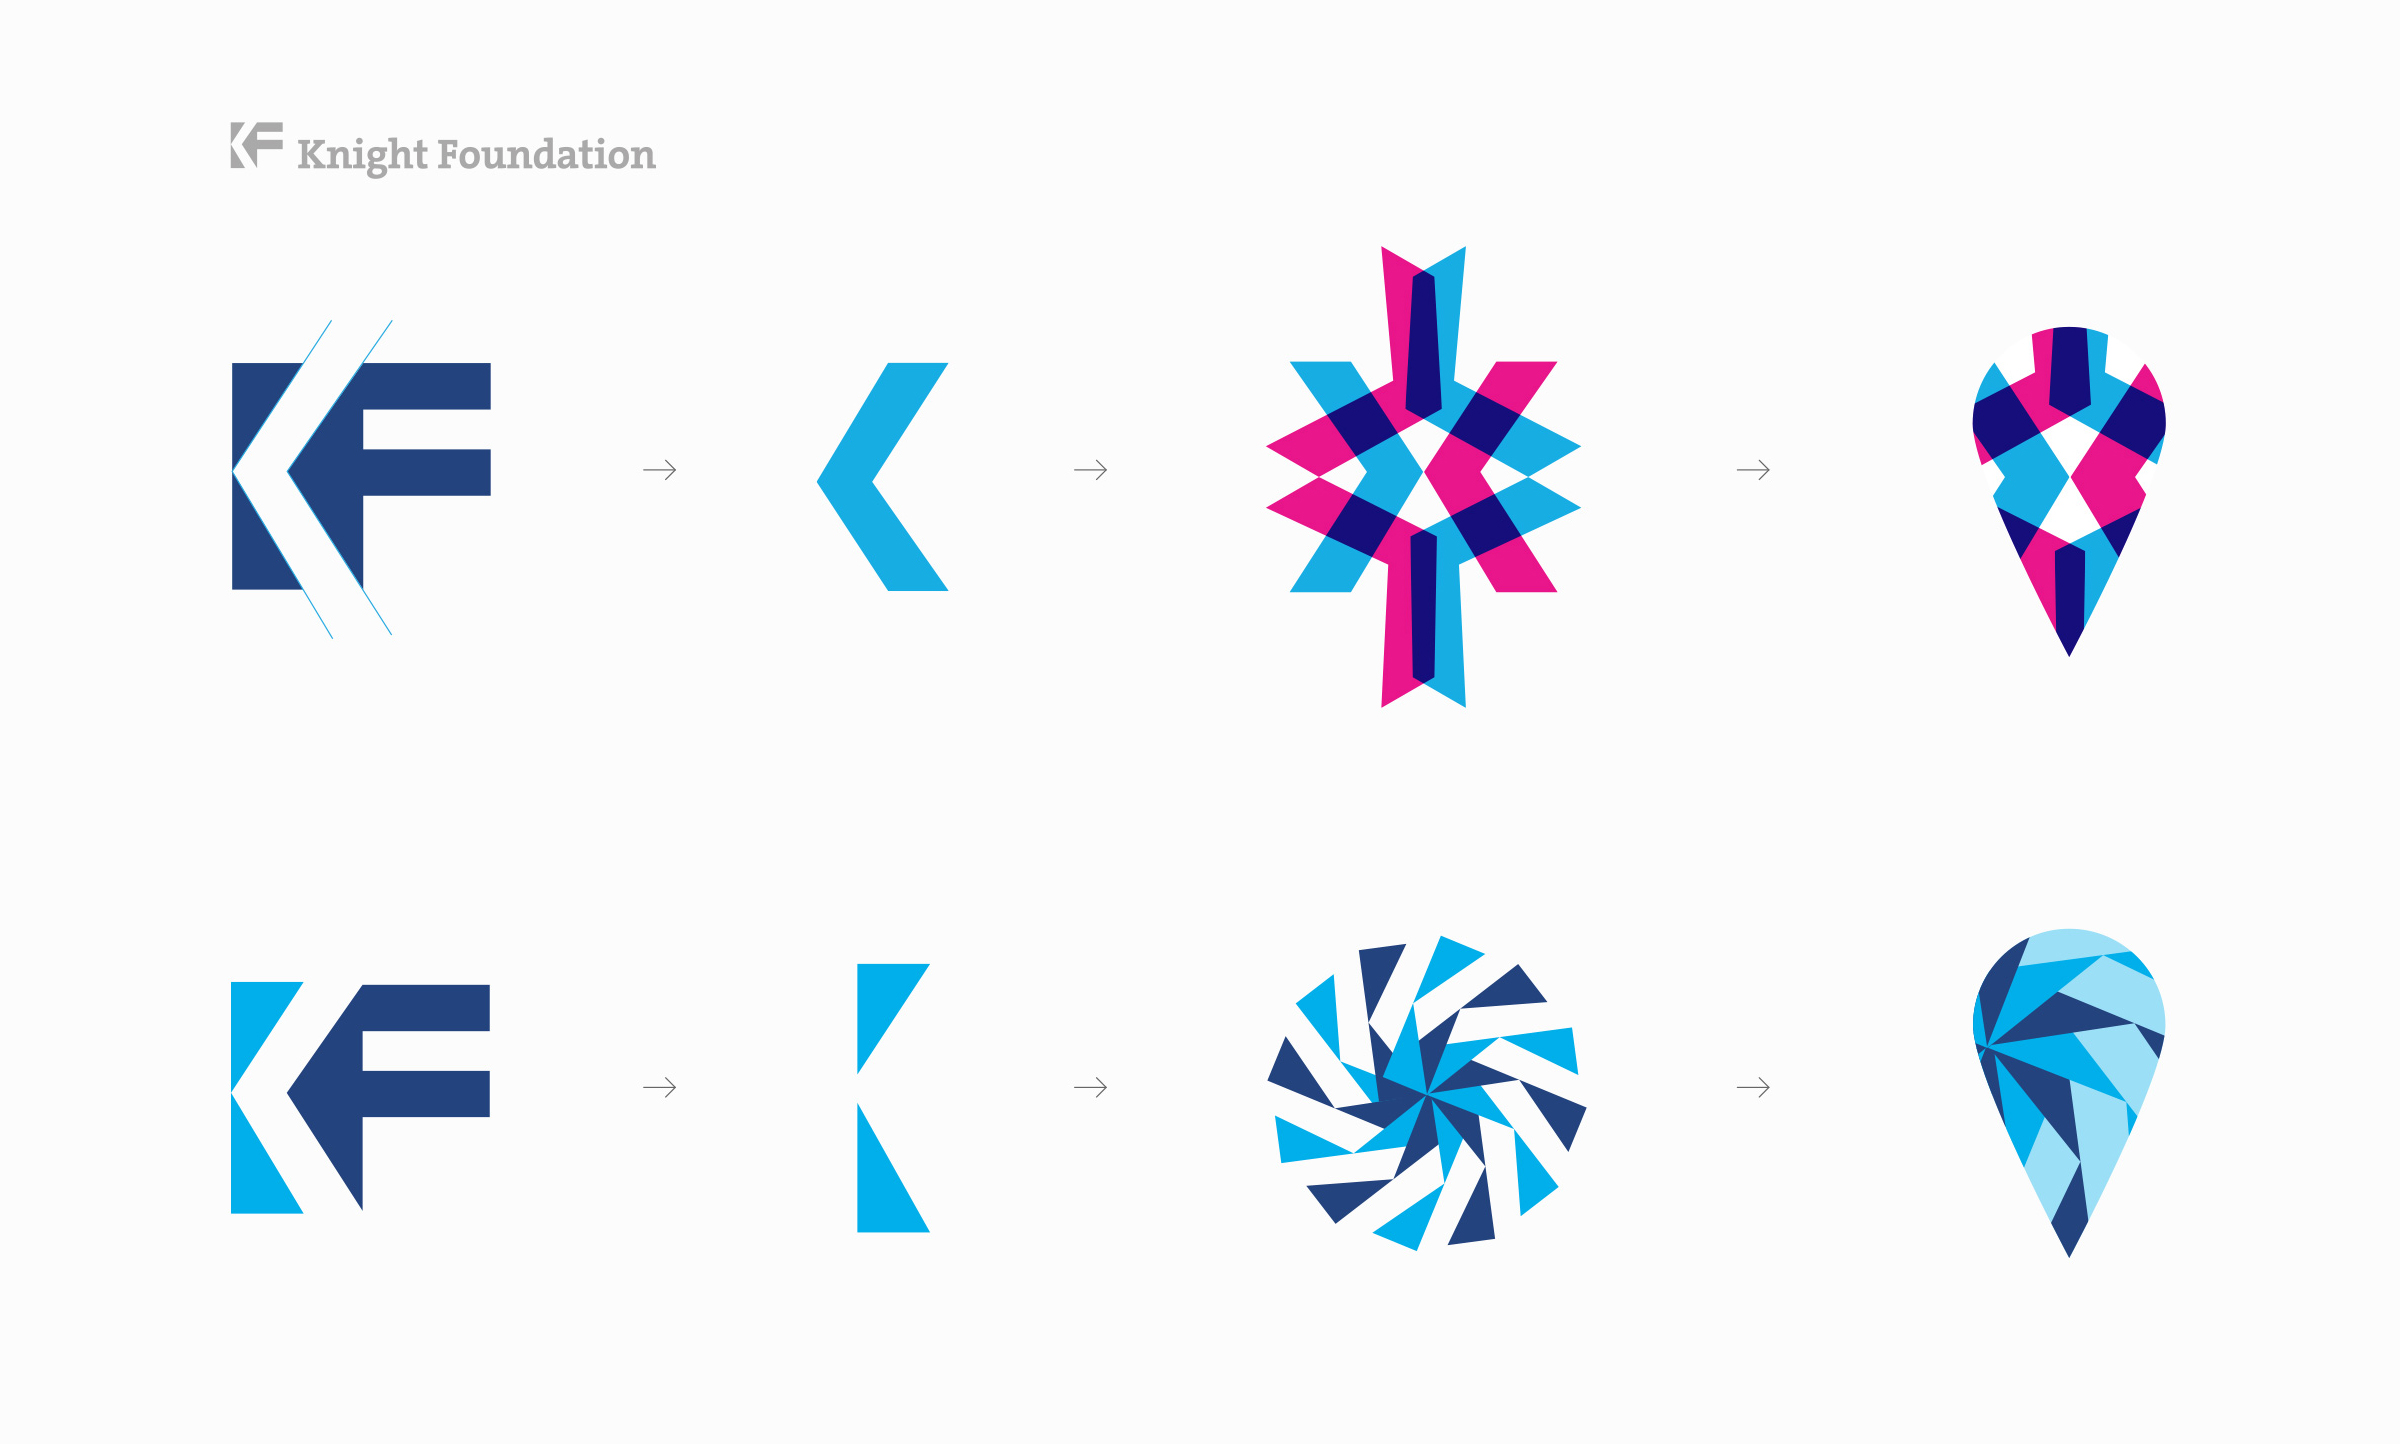 schematic of the pieces from the knight foundation logo how they were used to create pattern designs